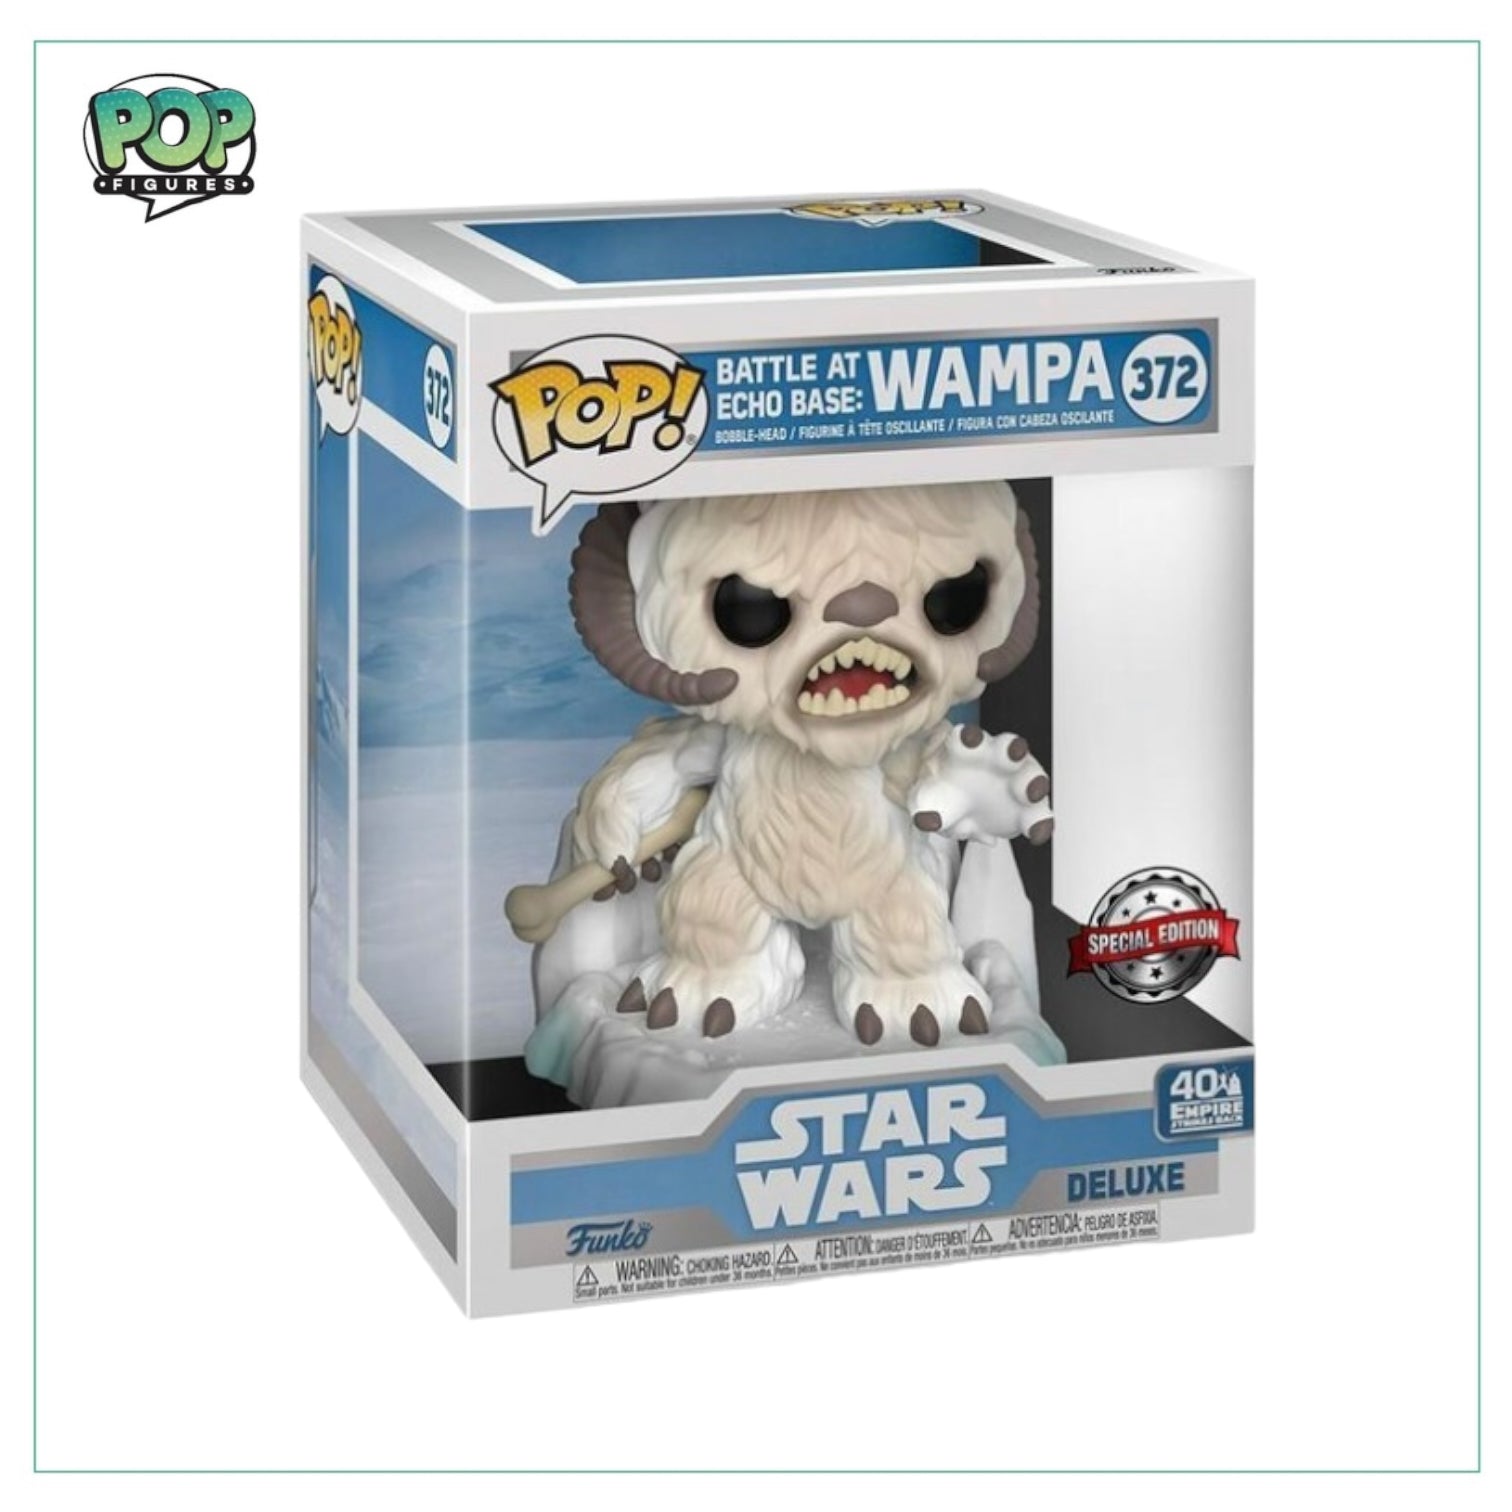 Wampa #372 Deluxe Funko Pop! -  Battle at Echo Base - Star Wars - Special Editions